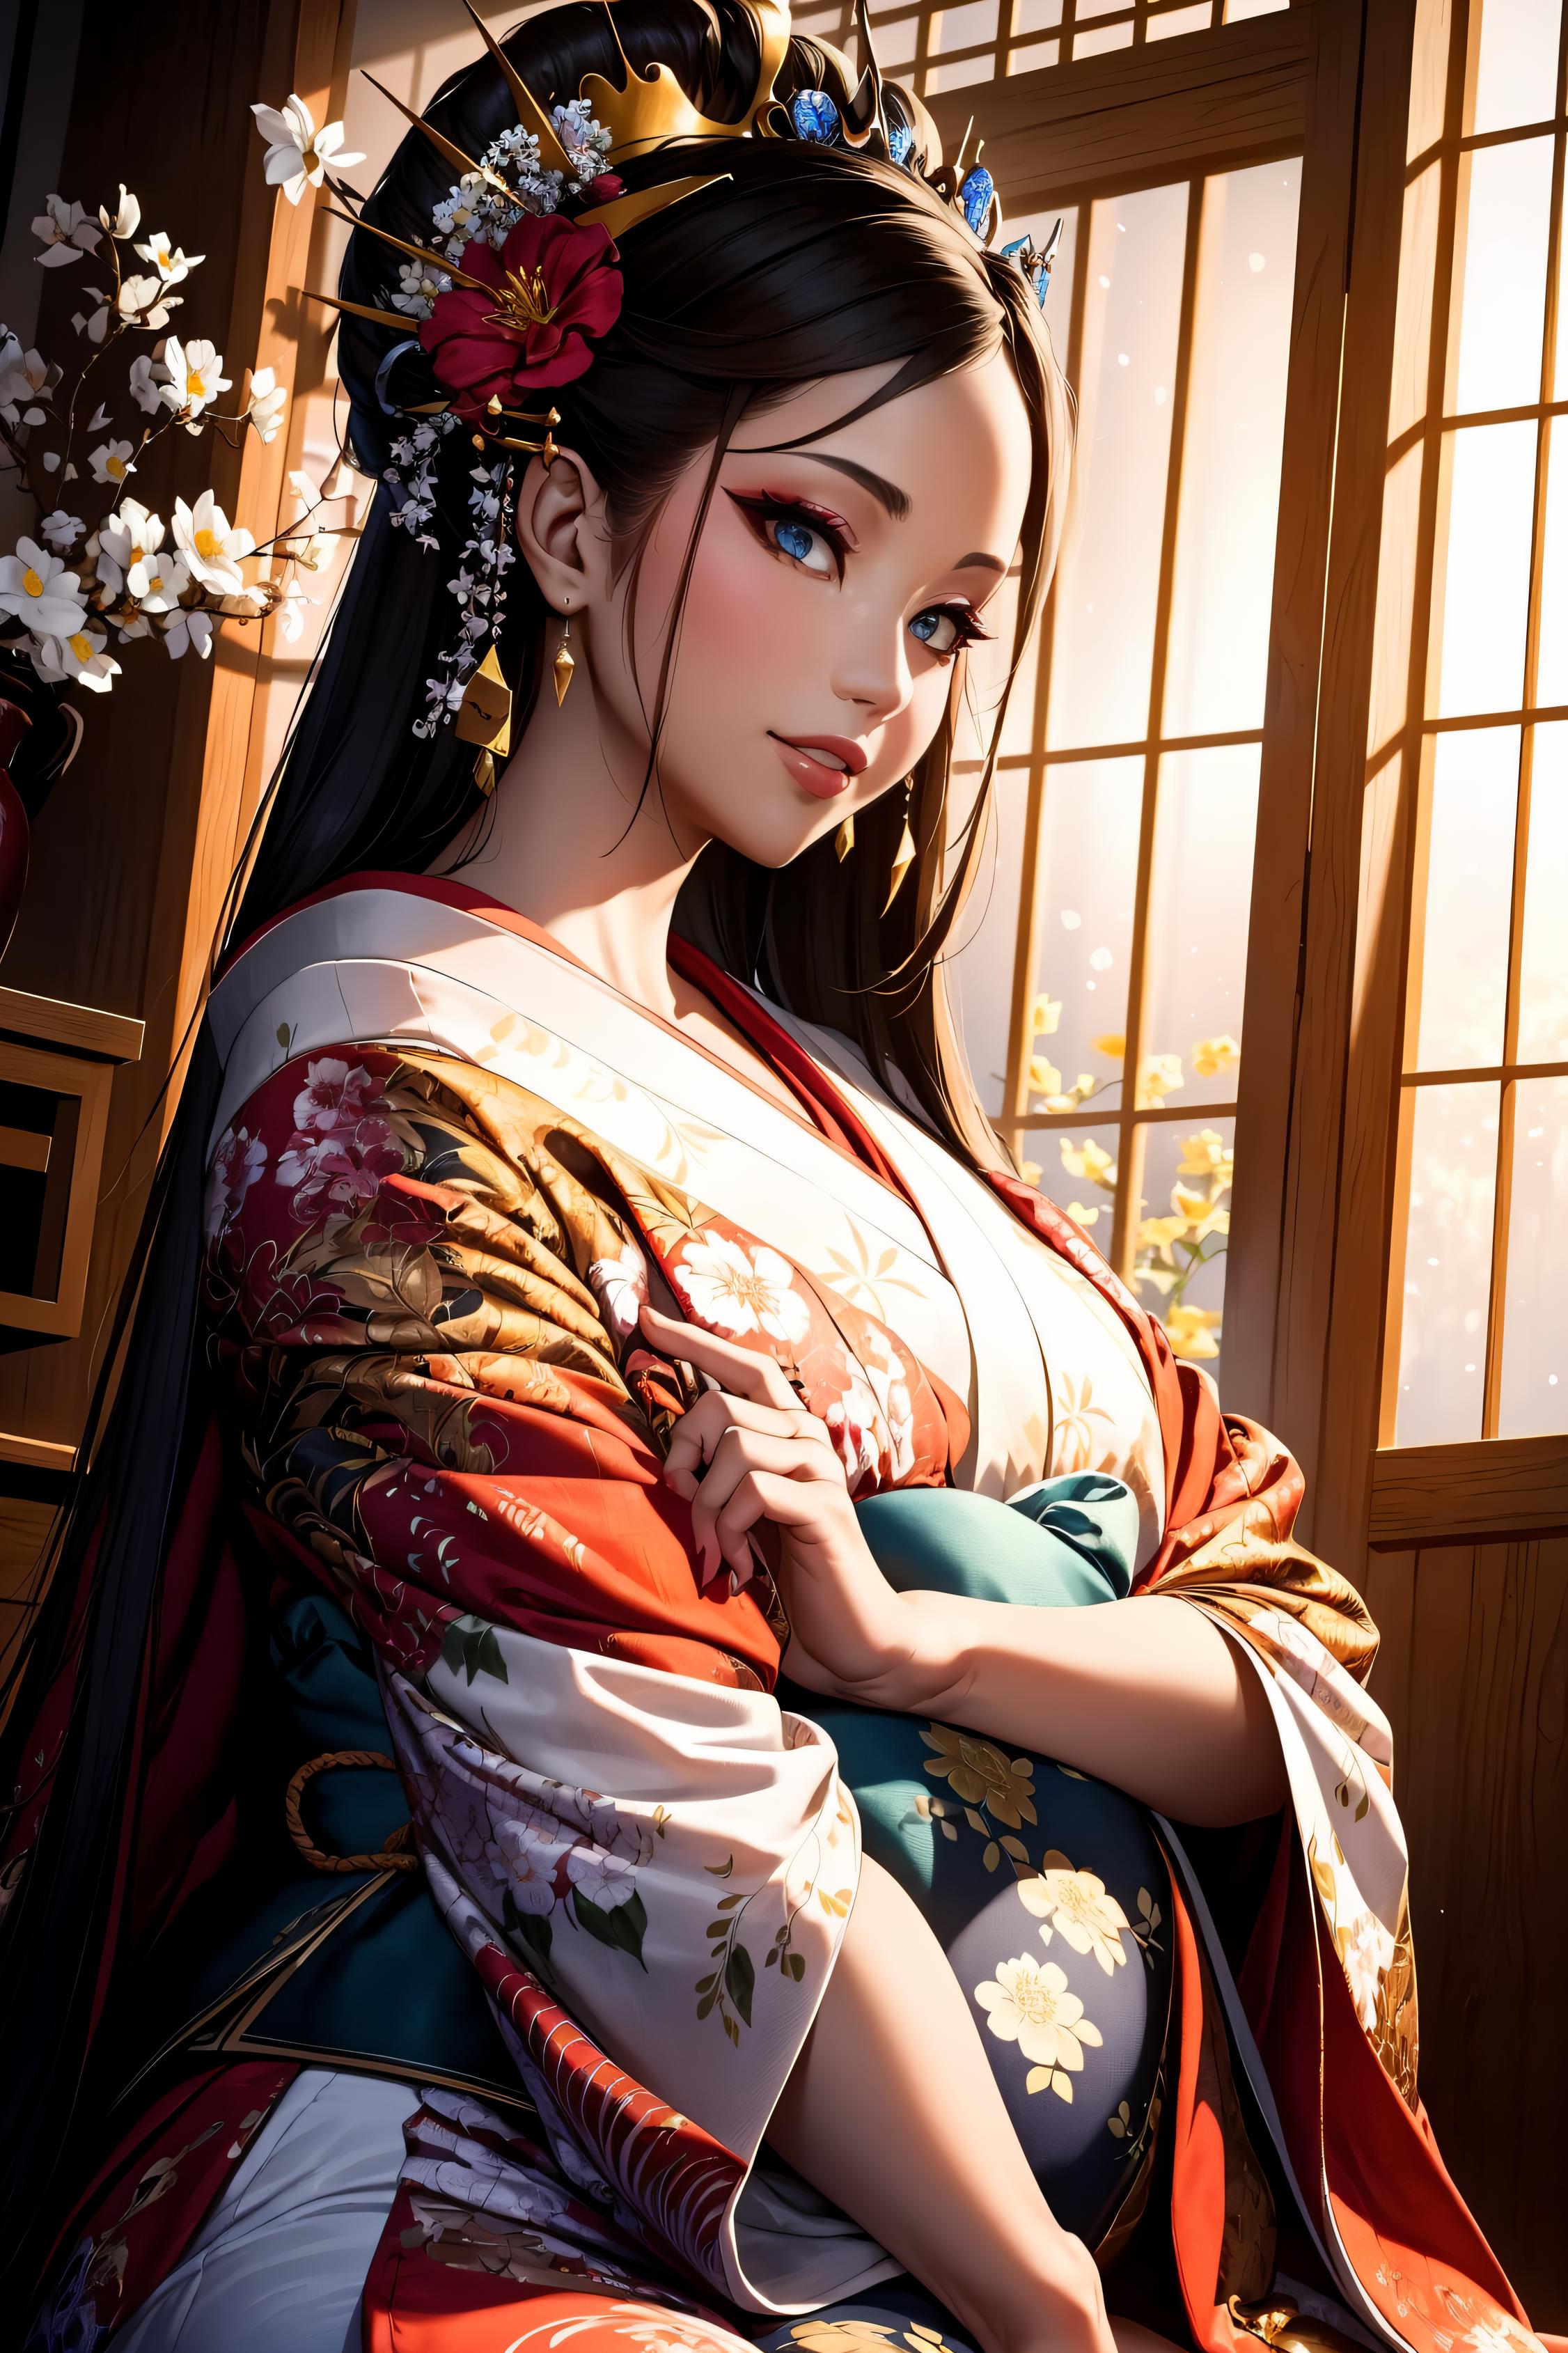 Backgrounds are lanterns, torii, oiran and black mask, full moon, model  pose - SeaArt AI